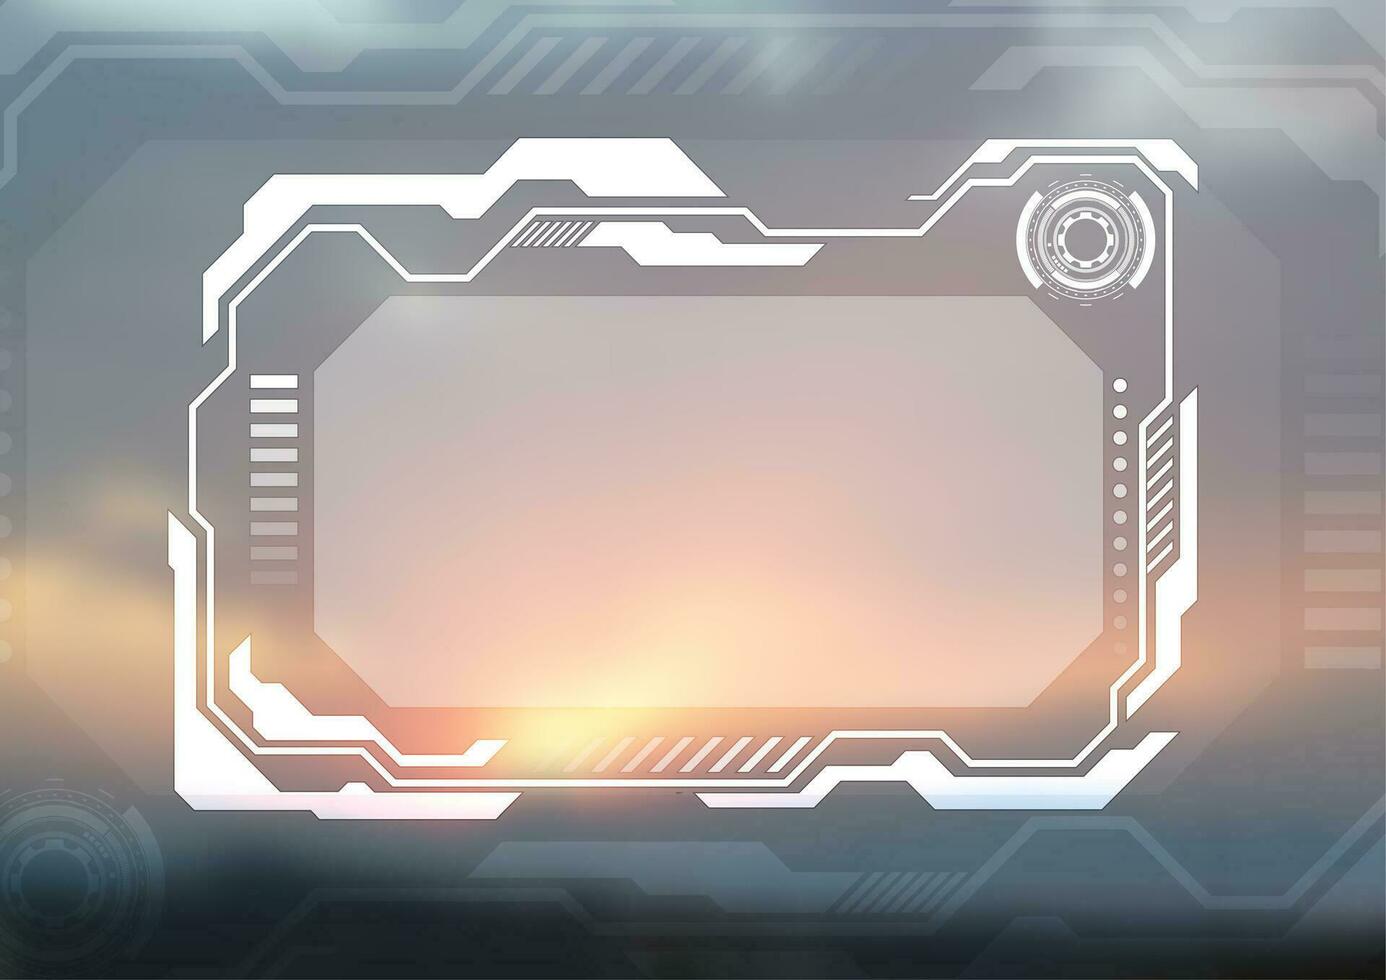 Technology futuristic HUD display interface background vector